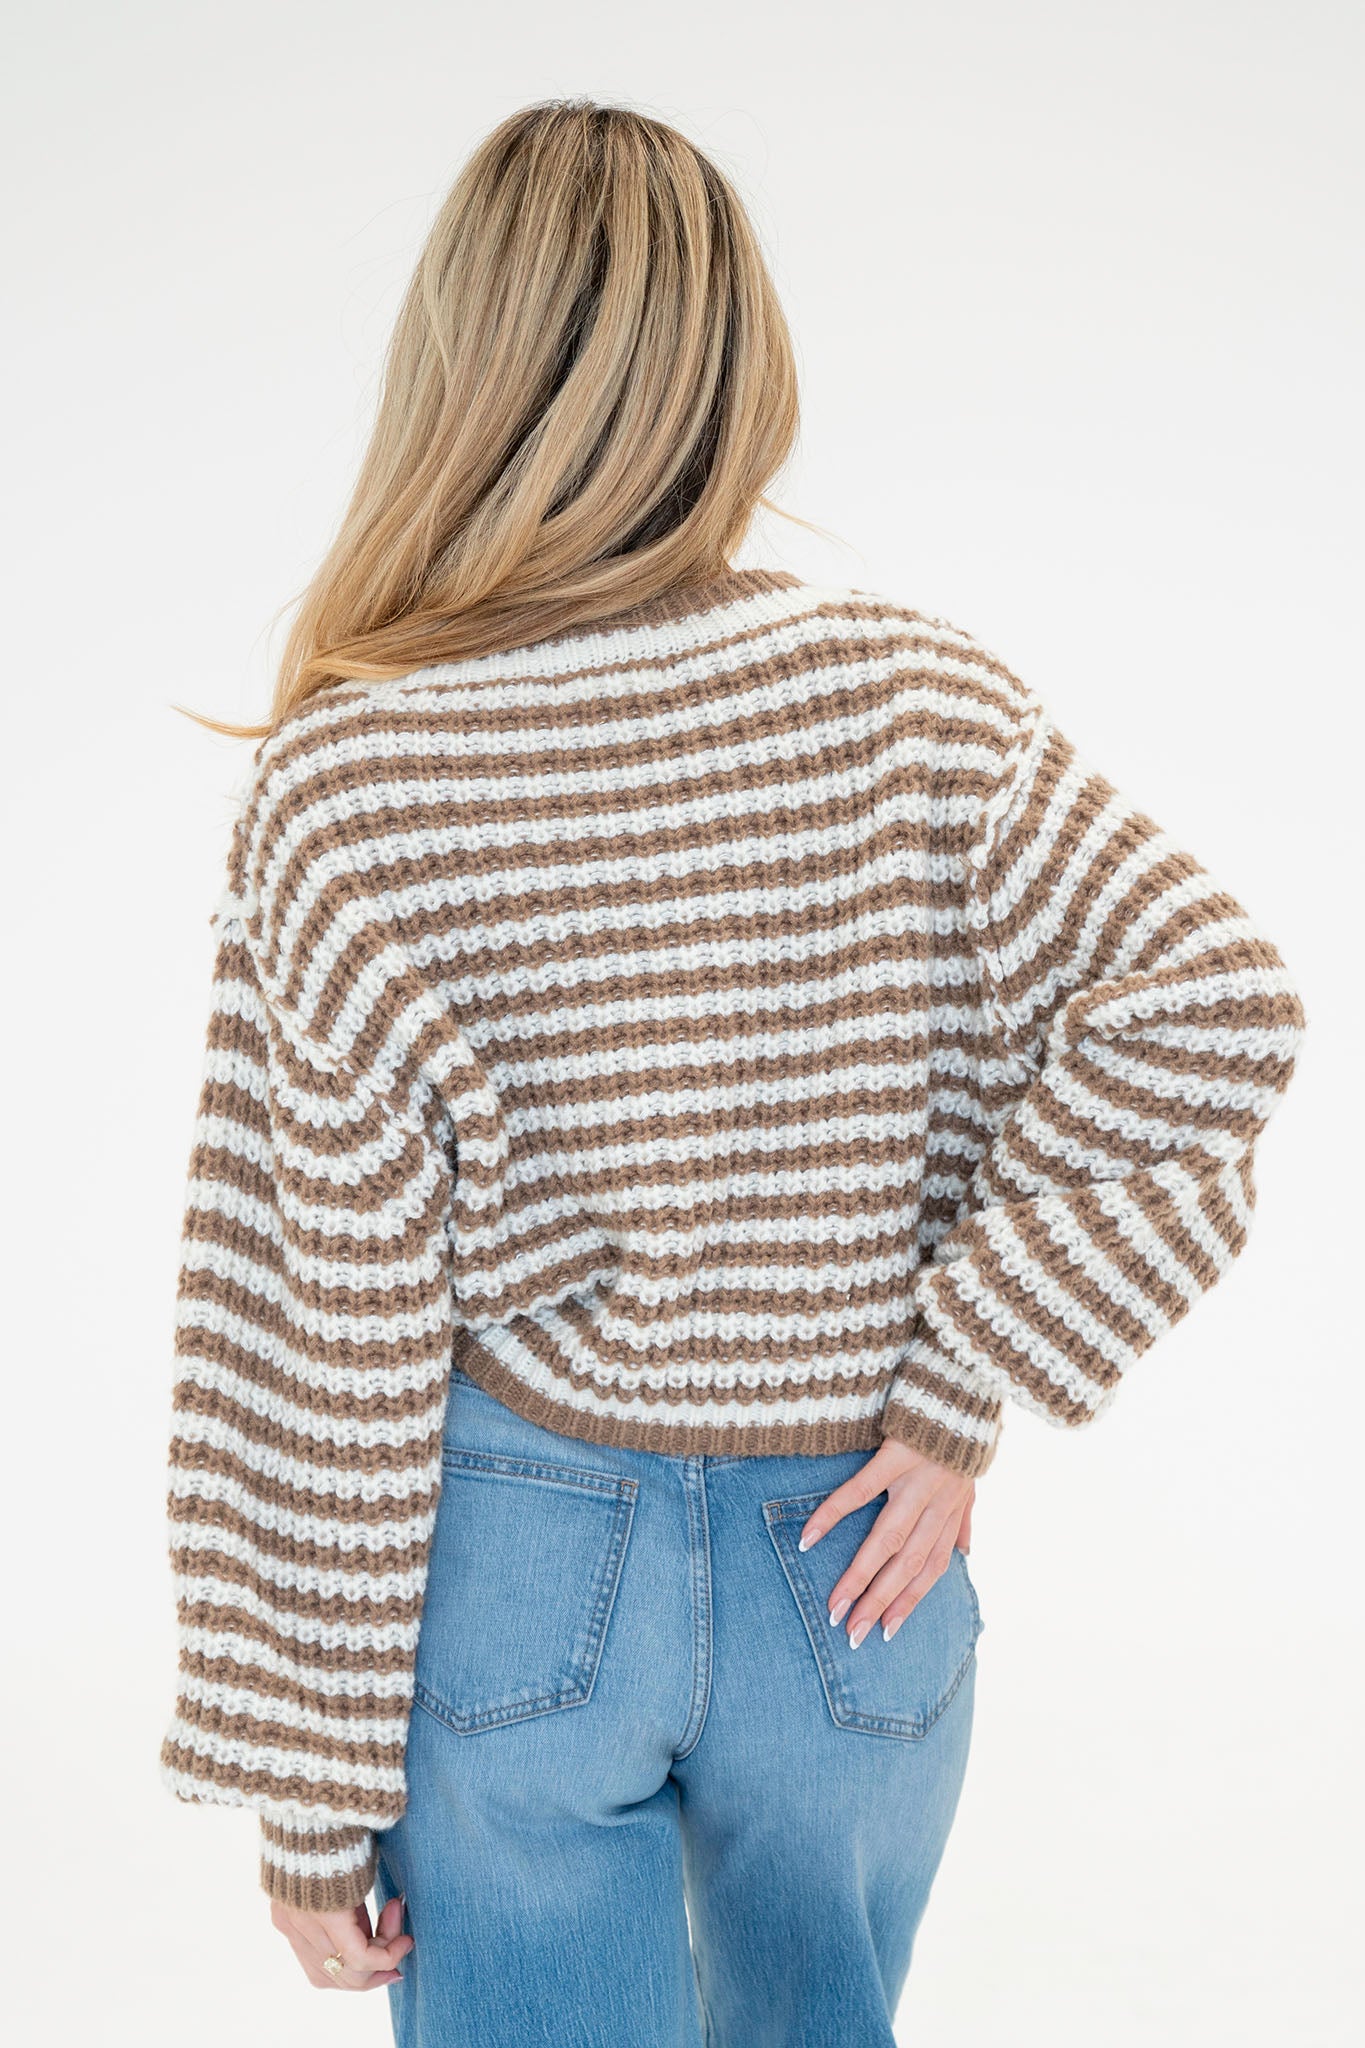 View 3 of Franklinia Striped Sweater, a Sweaters from Larrea Cove. Detail: .